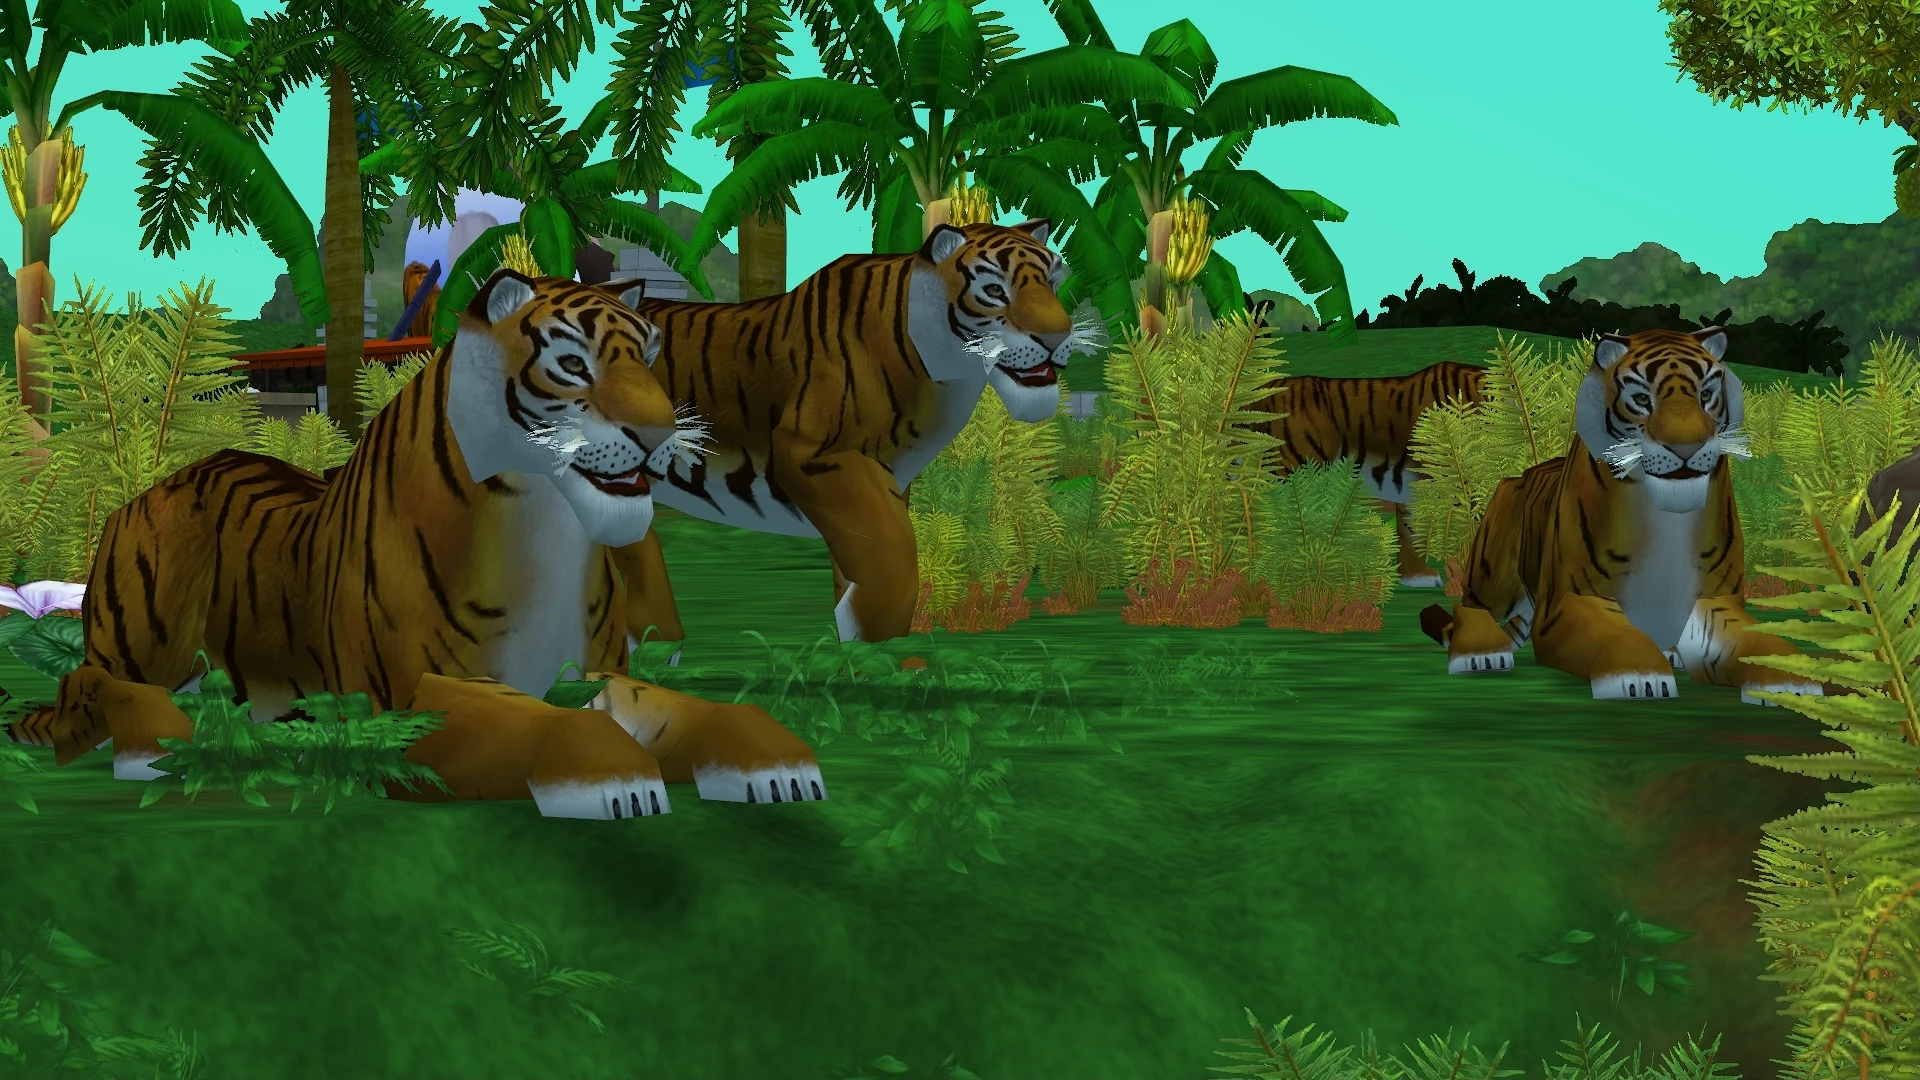 Download People dressed as saber-toothed tigers from Zoo Tycoon 2 for GTA  San Andreas